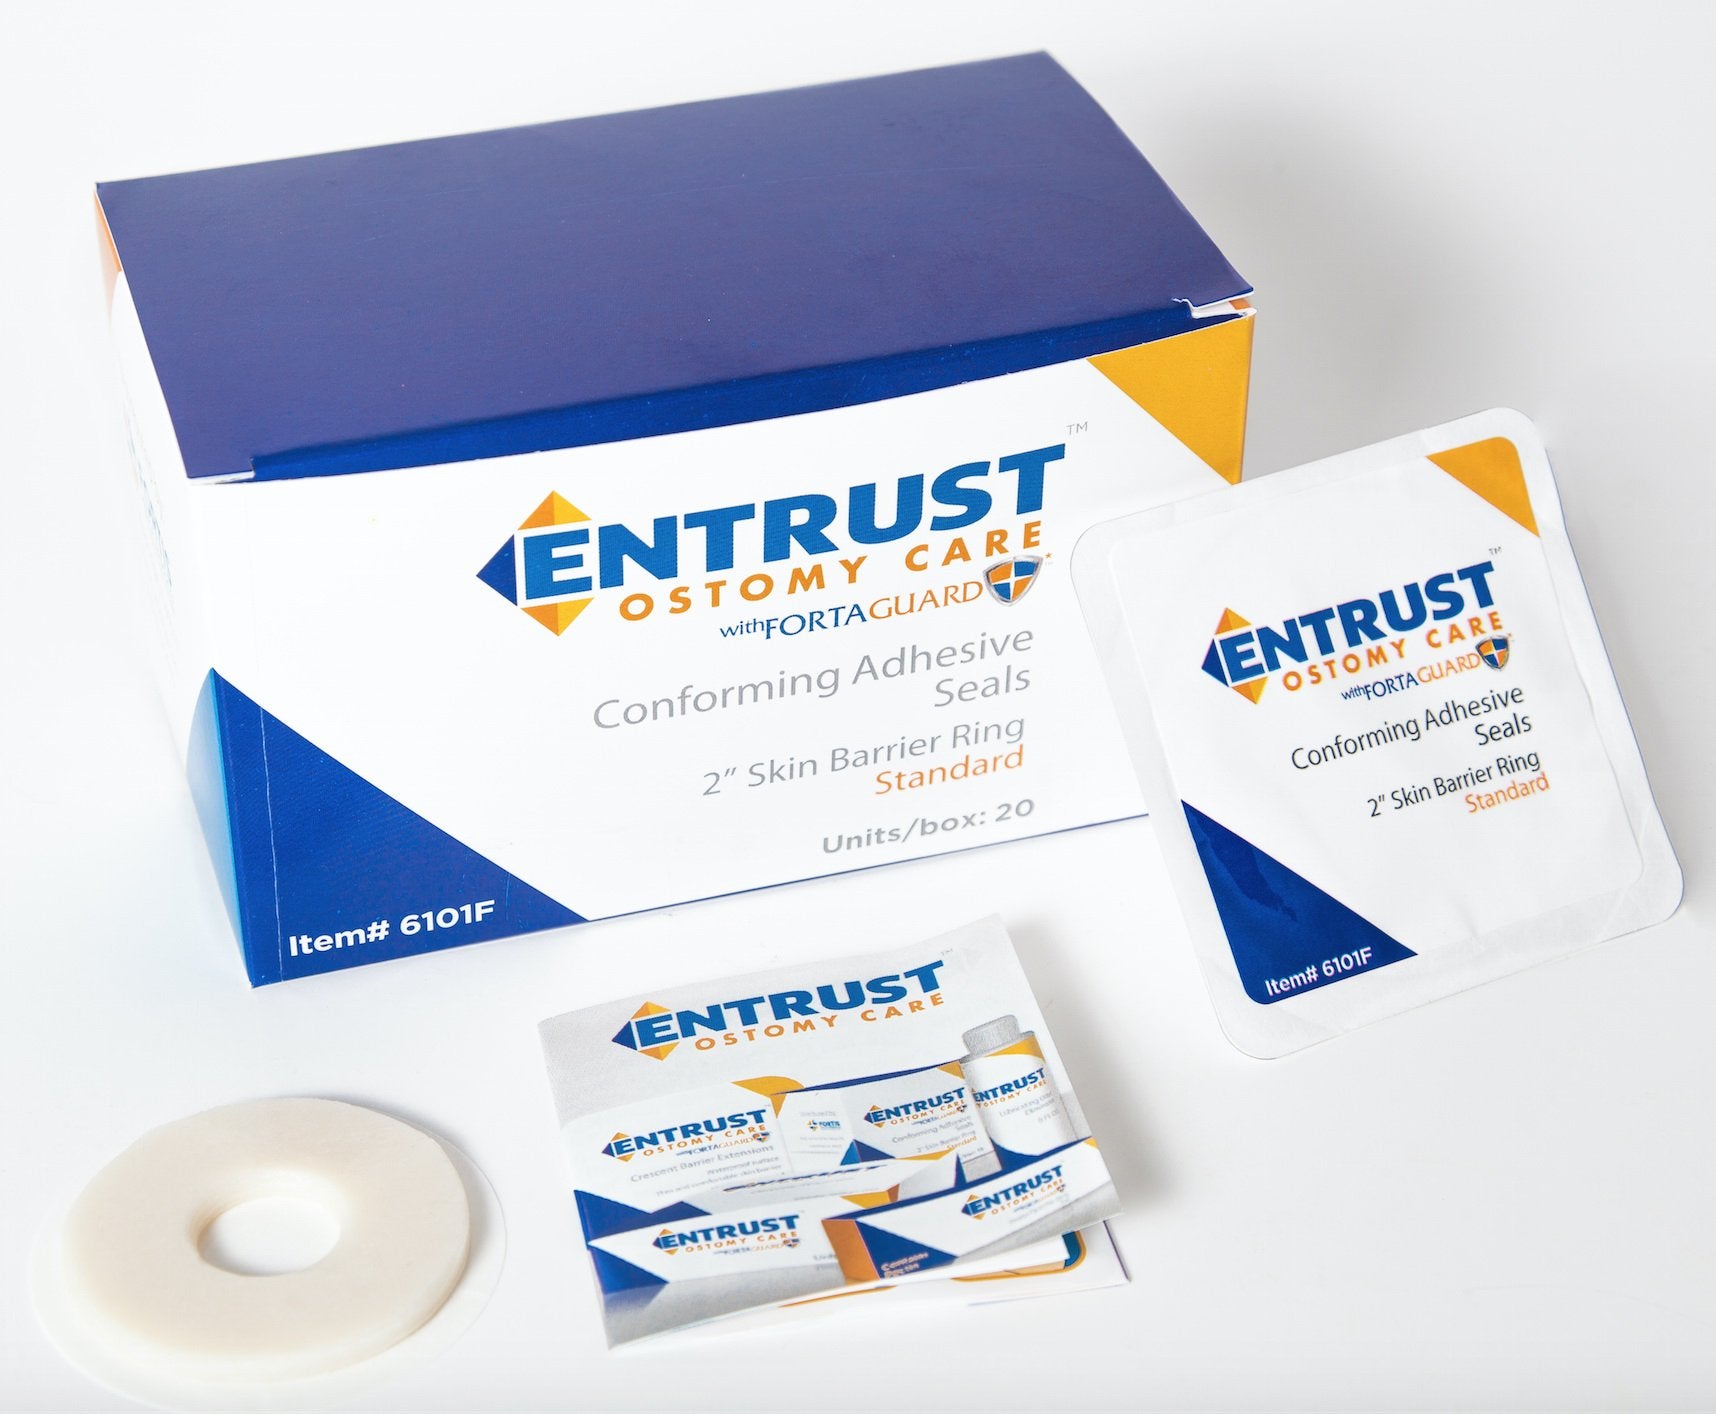 Skin Barrier Ring Entrust™ FortaGuard Moldable, Extended Wear Adhesive without Tape Without Flange Universal System 4 Inch Diameter